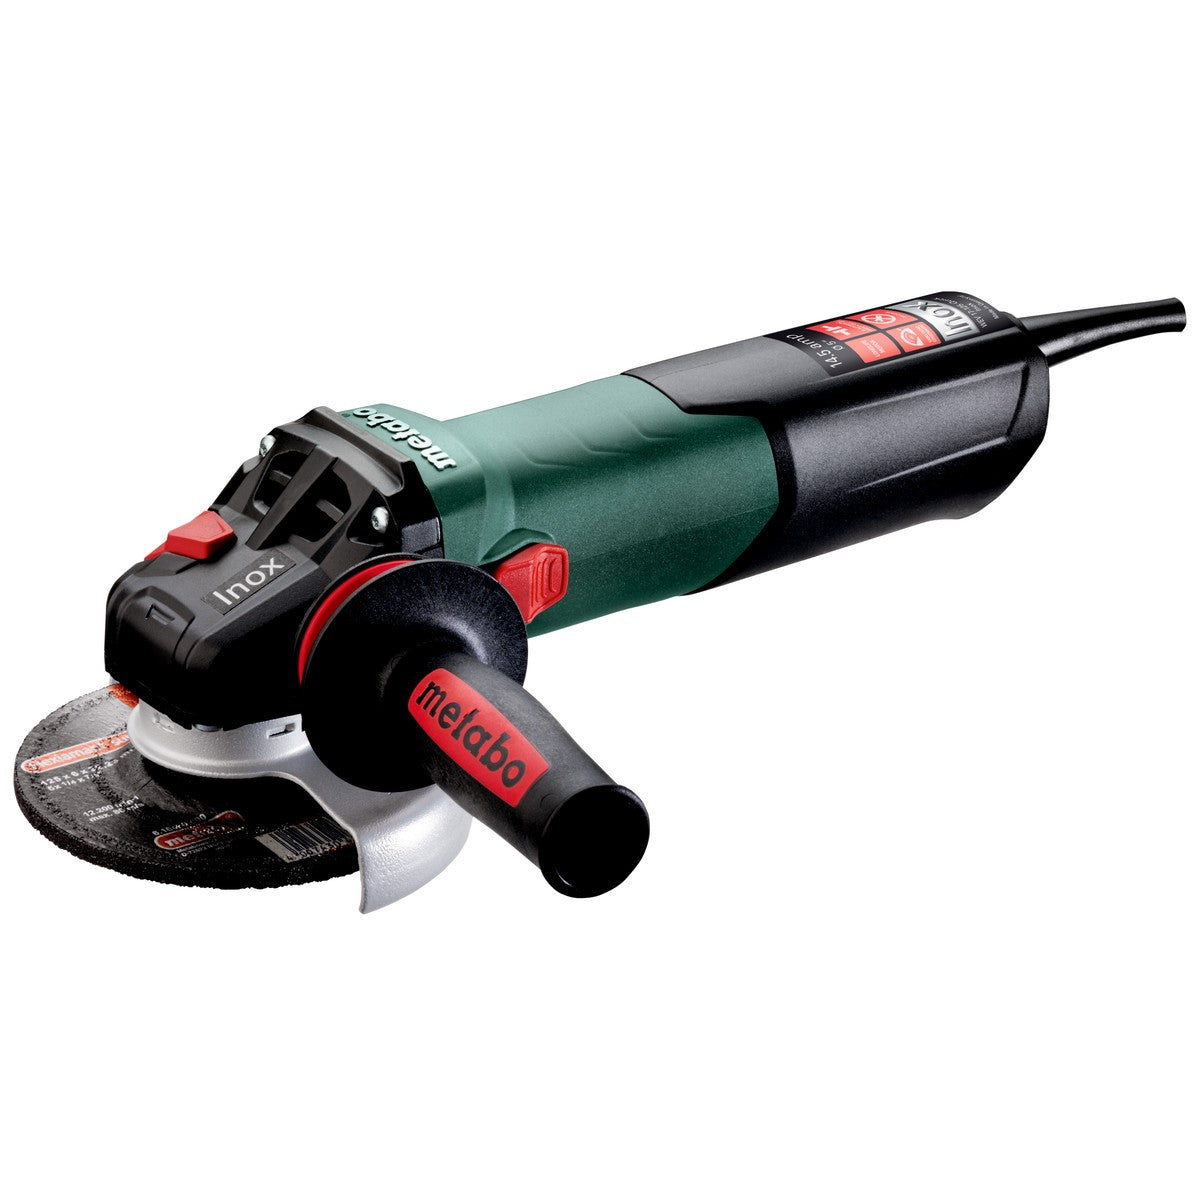 Metabo (600517420) 5 inch Angle Grinder w LockOn Switch image 1 of 3